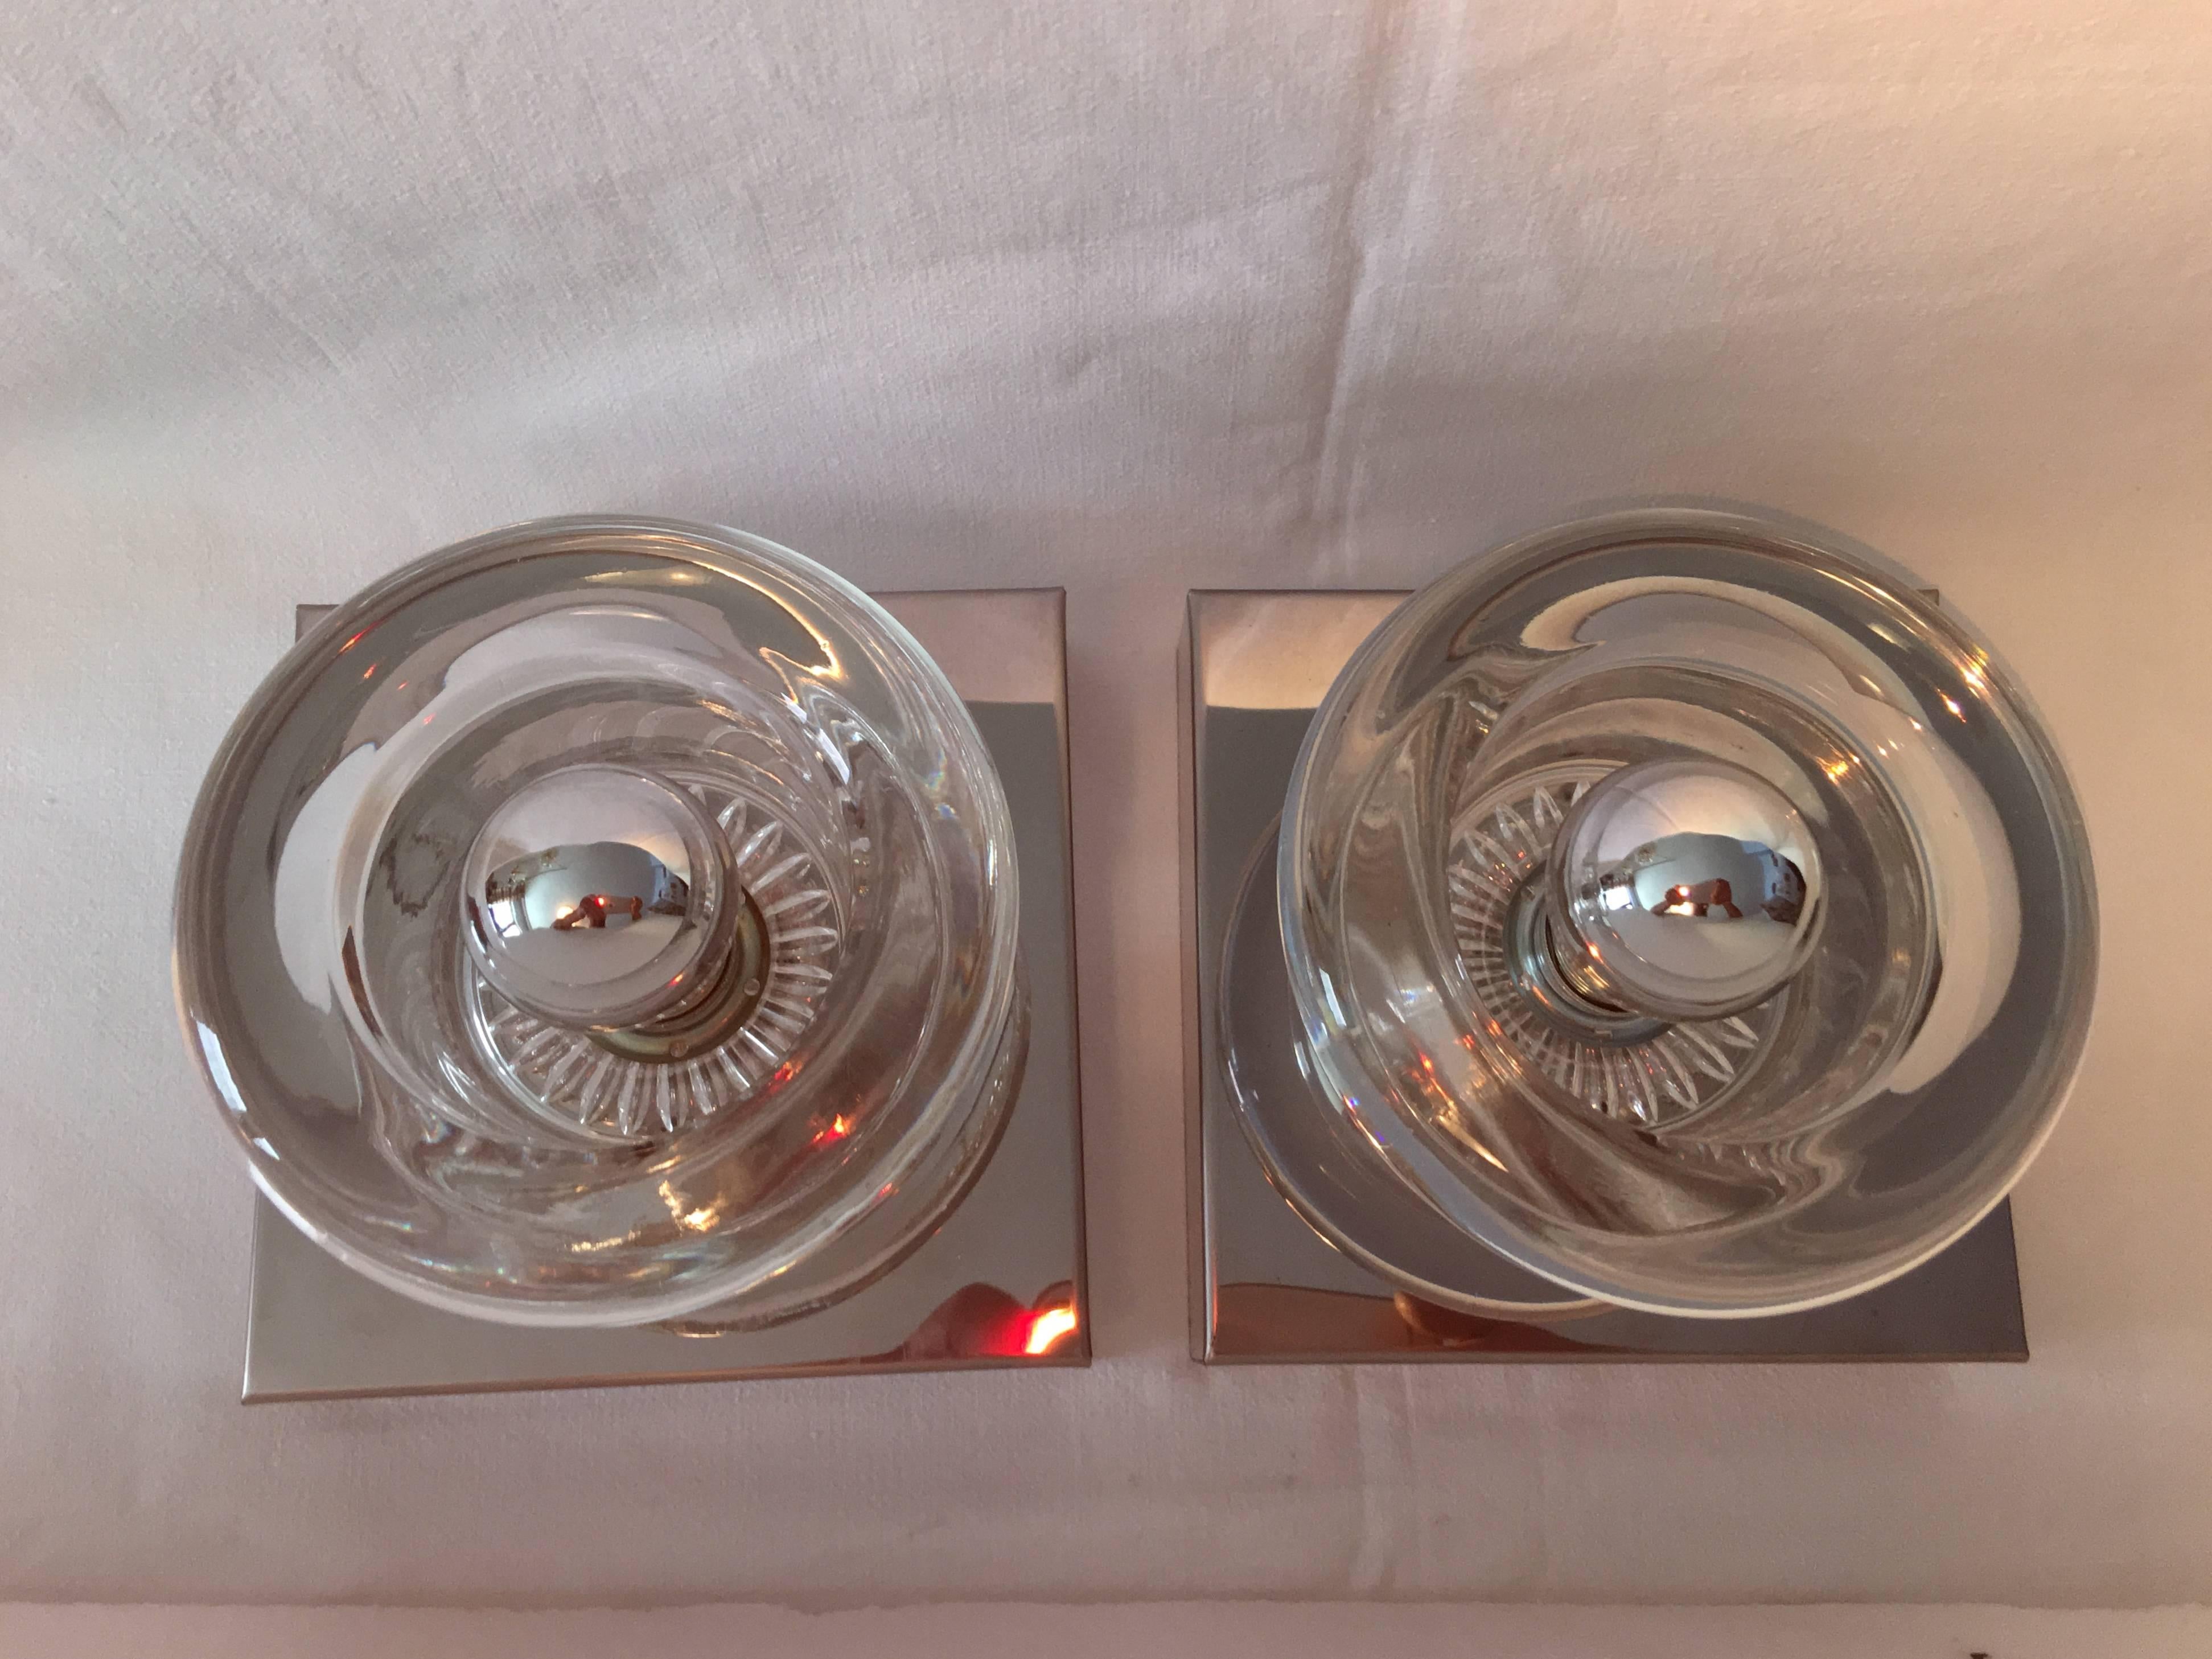 Chrome hardware and interior lights create a beautiful visual for this pair of glass sconces. each fixture requires one E14 European candelabra light bulb up to 40 watts.
Lovingly packaged in our European facility. It will be shipped directly to